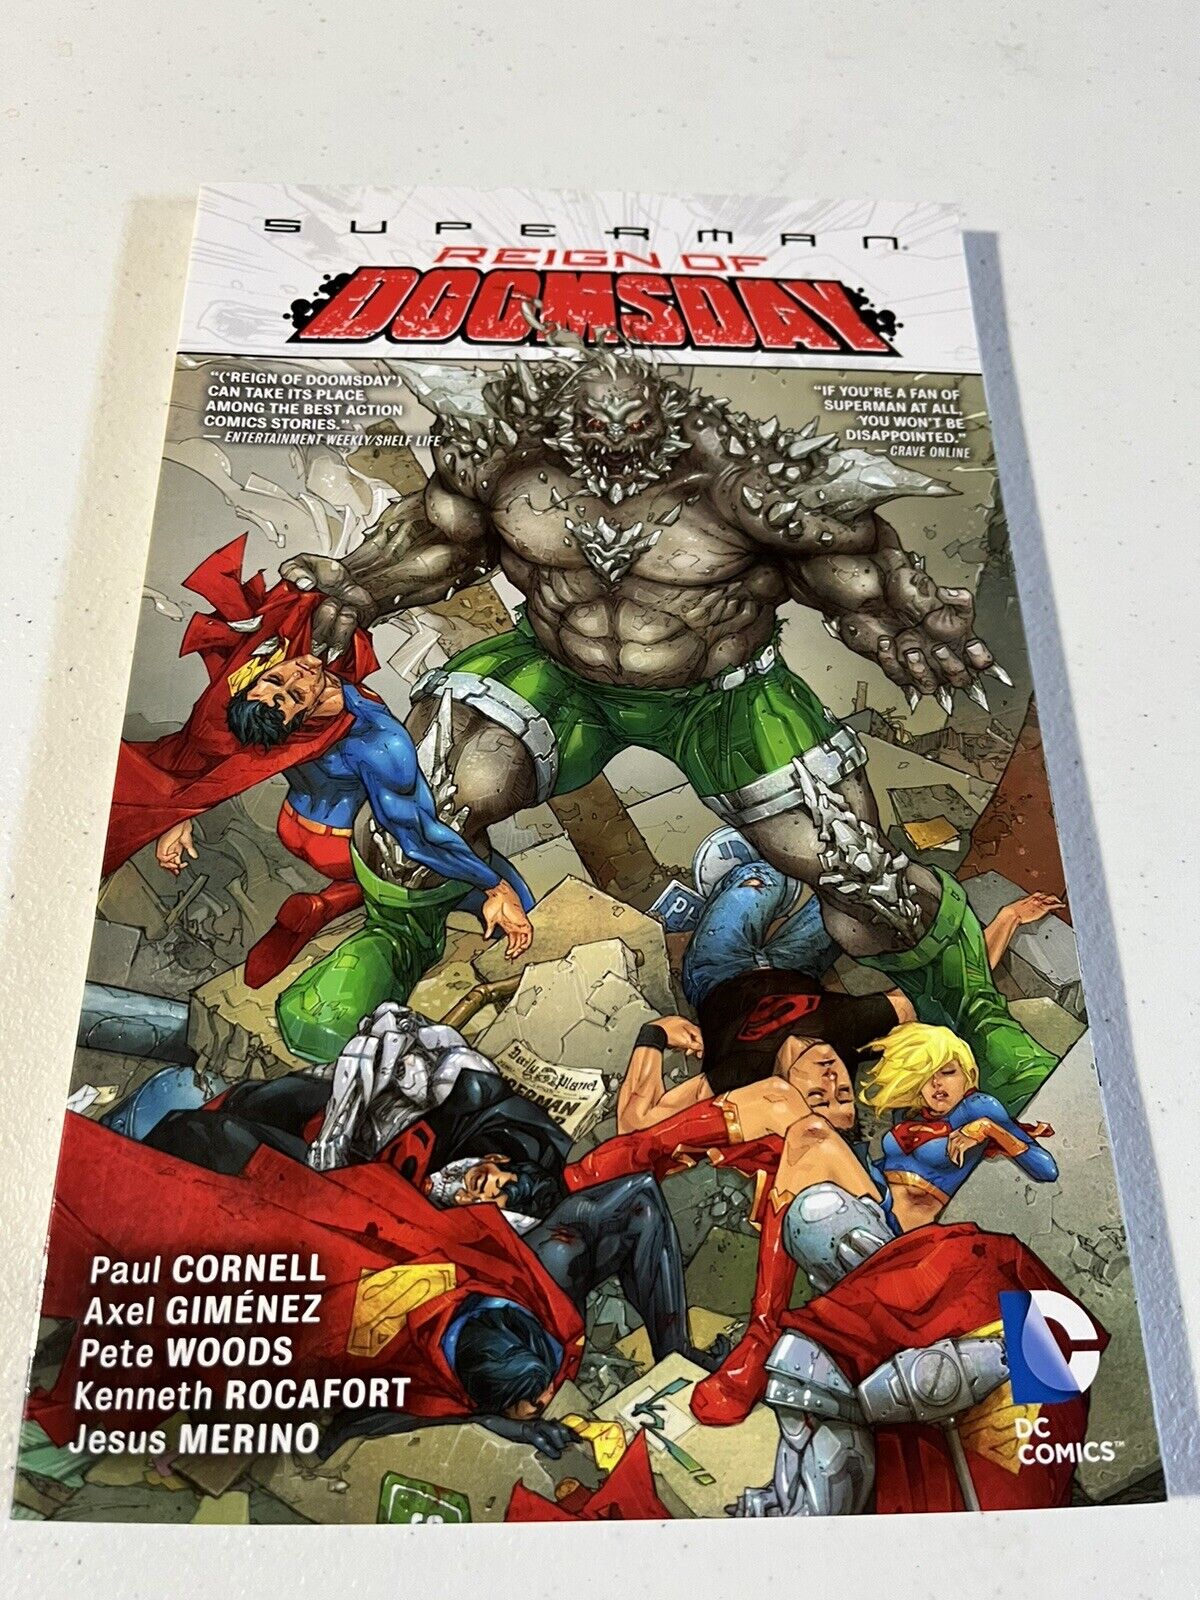 Superman Reign of Doomsday by Paul Cornell and others SC 2013 DC Comics